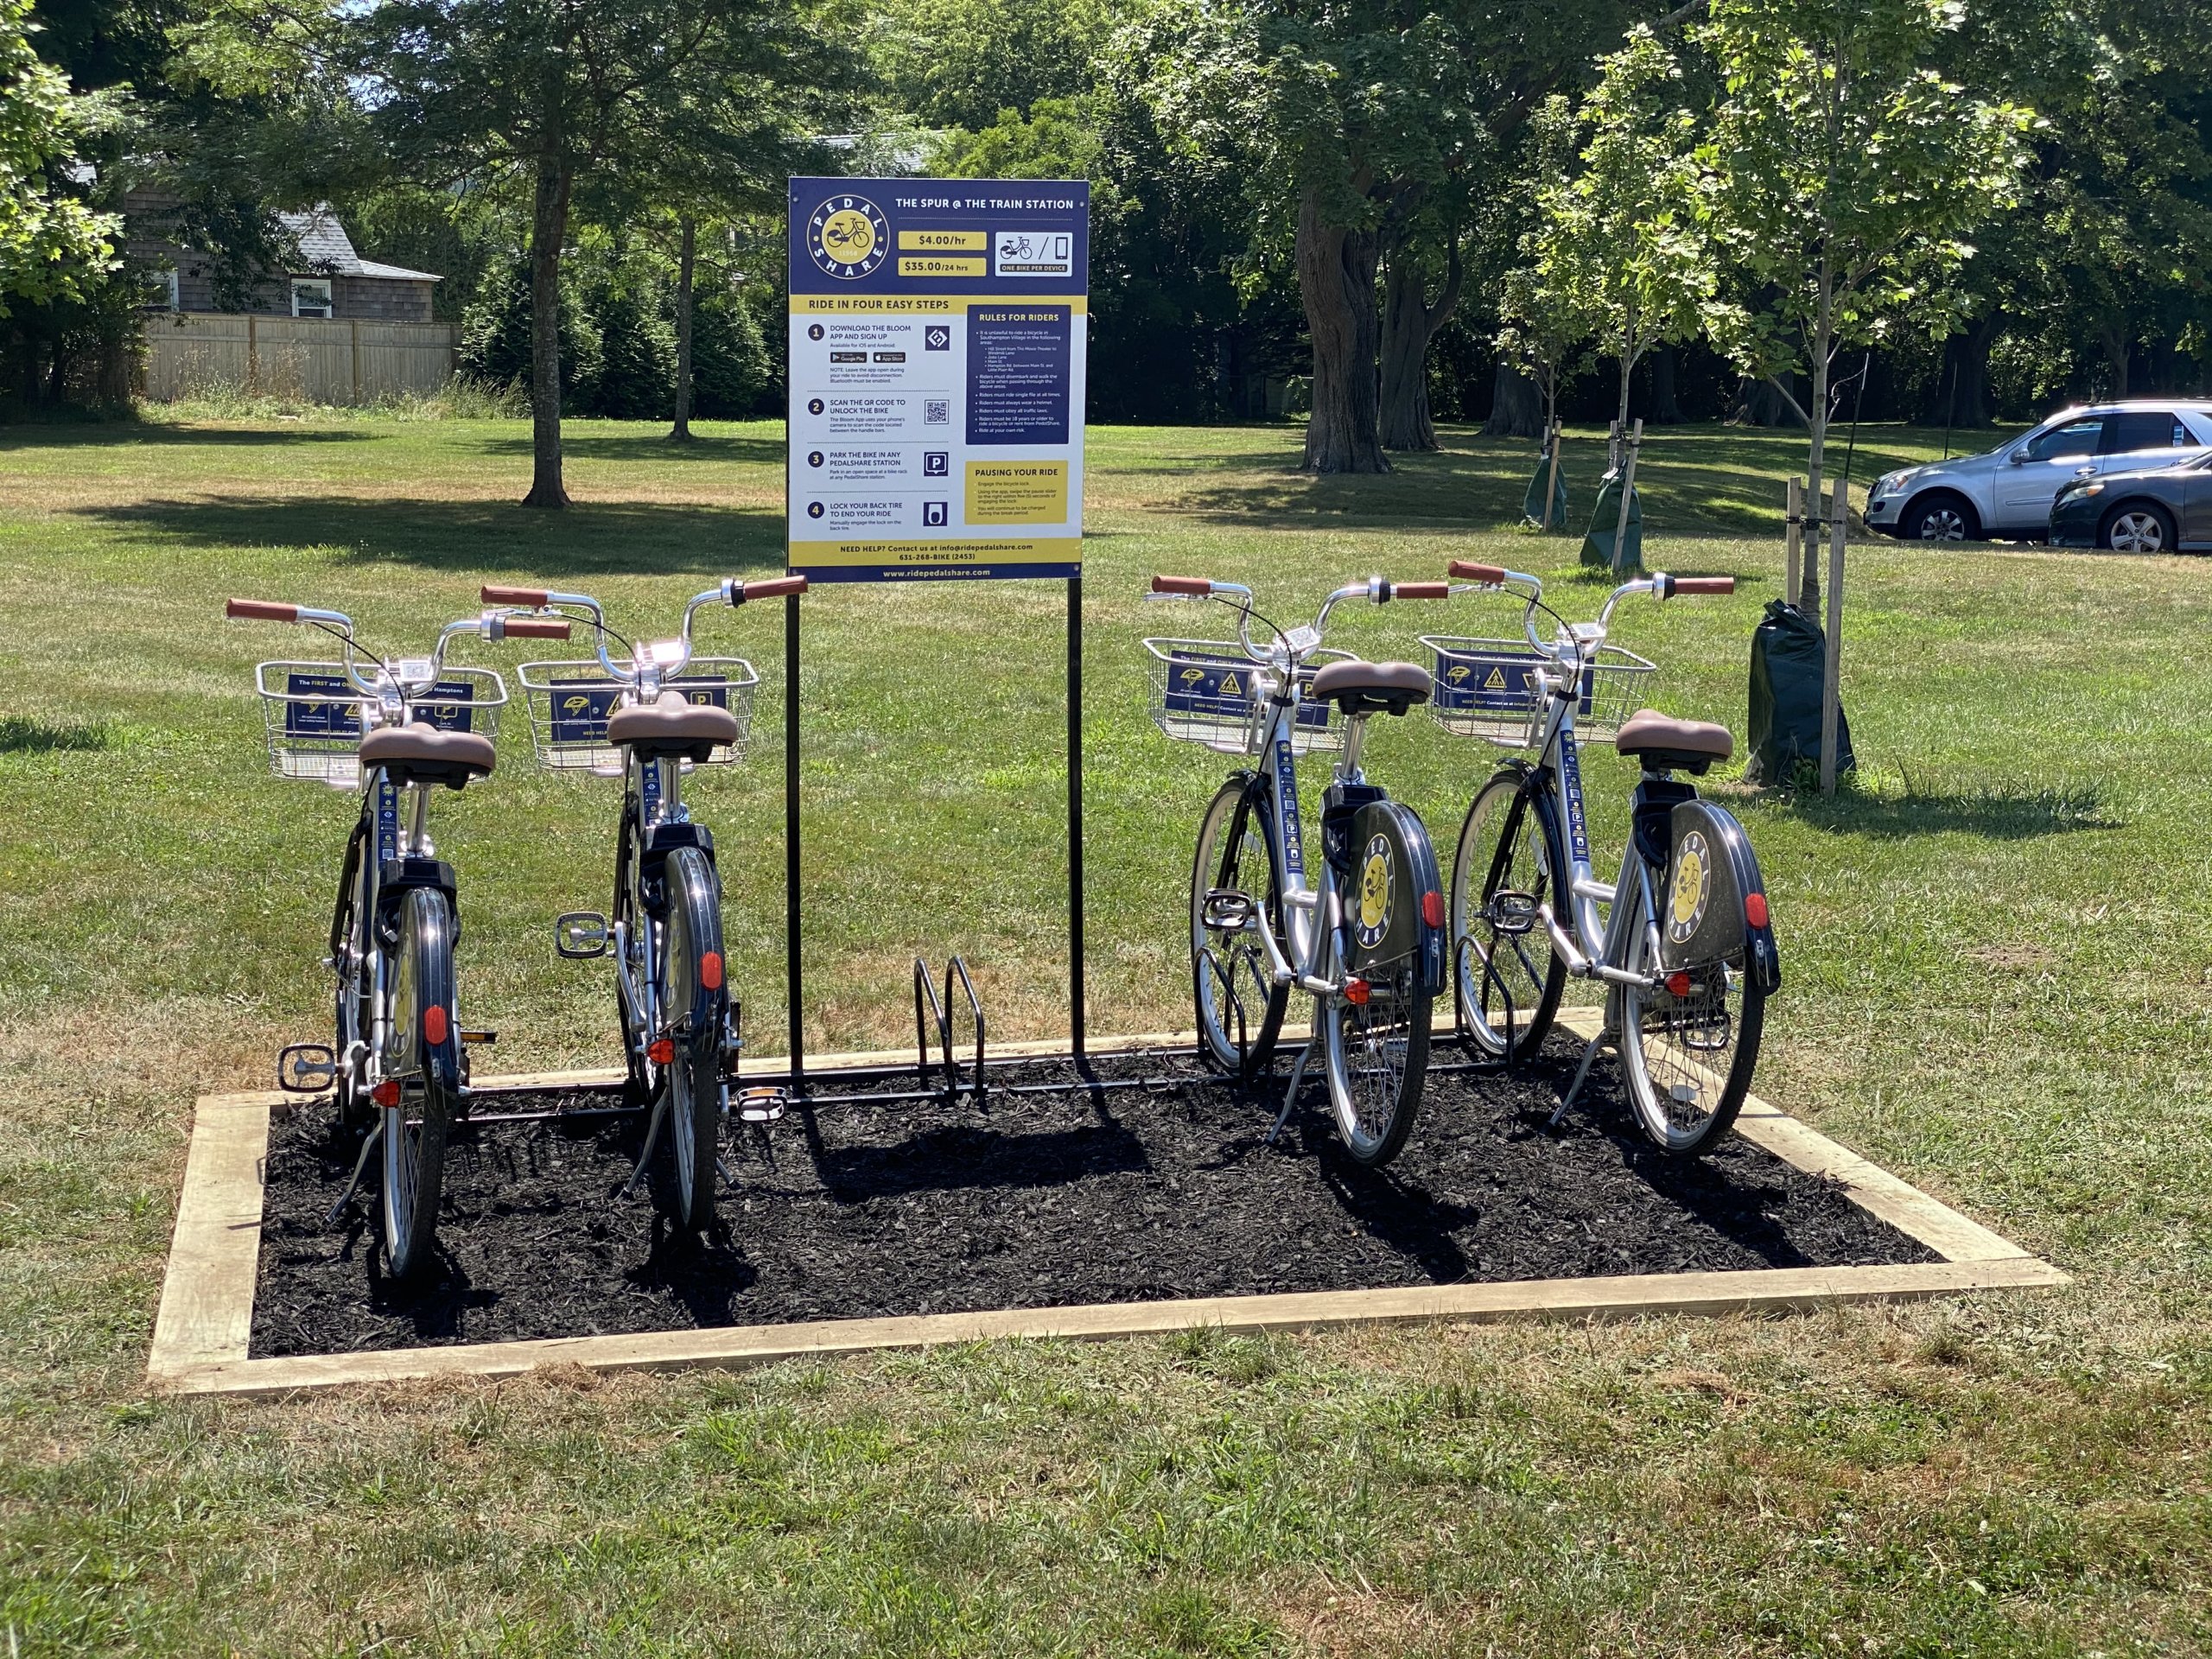 PedalShare bikes at the Southampton Village LIRR station offer a nice ride this summer